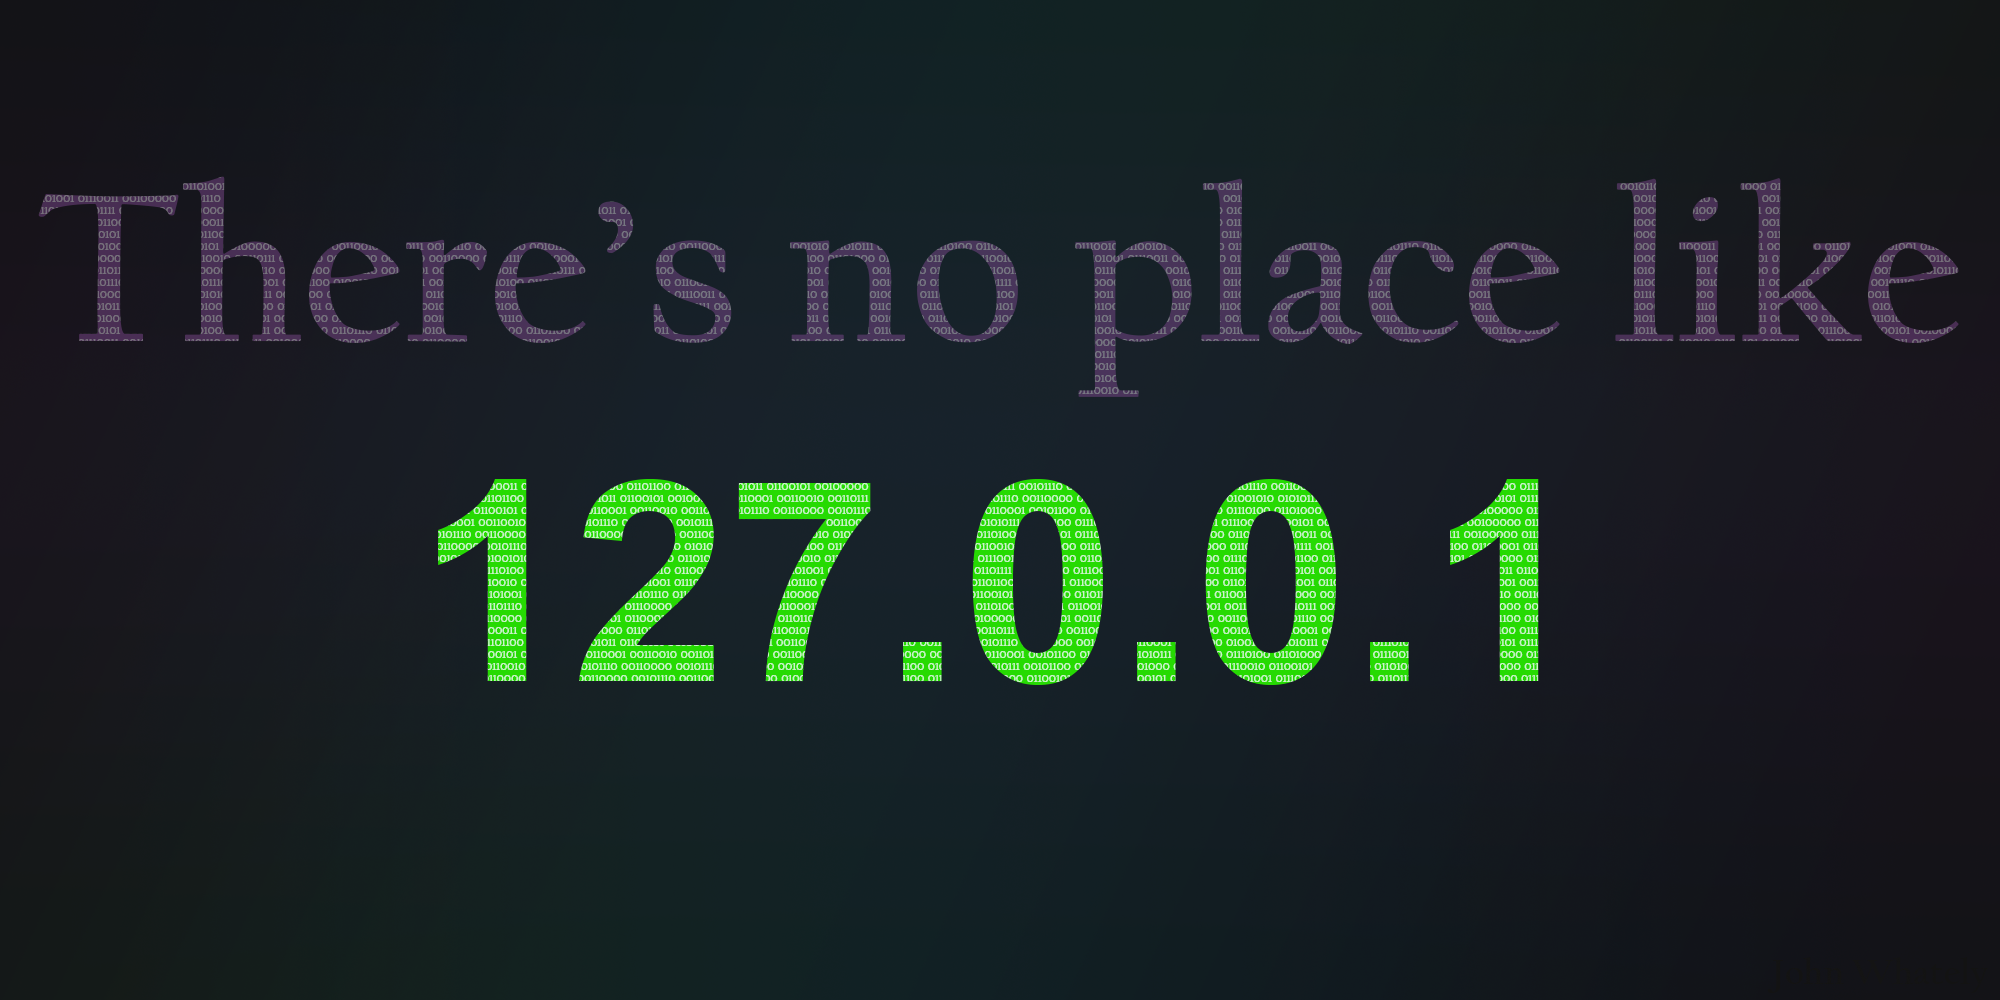 There's no place like 127.0.0.1 (wallpaper) number 2 wallpaper, IP address, binary. Songs, Science, Childish